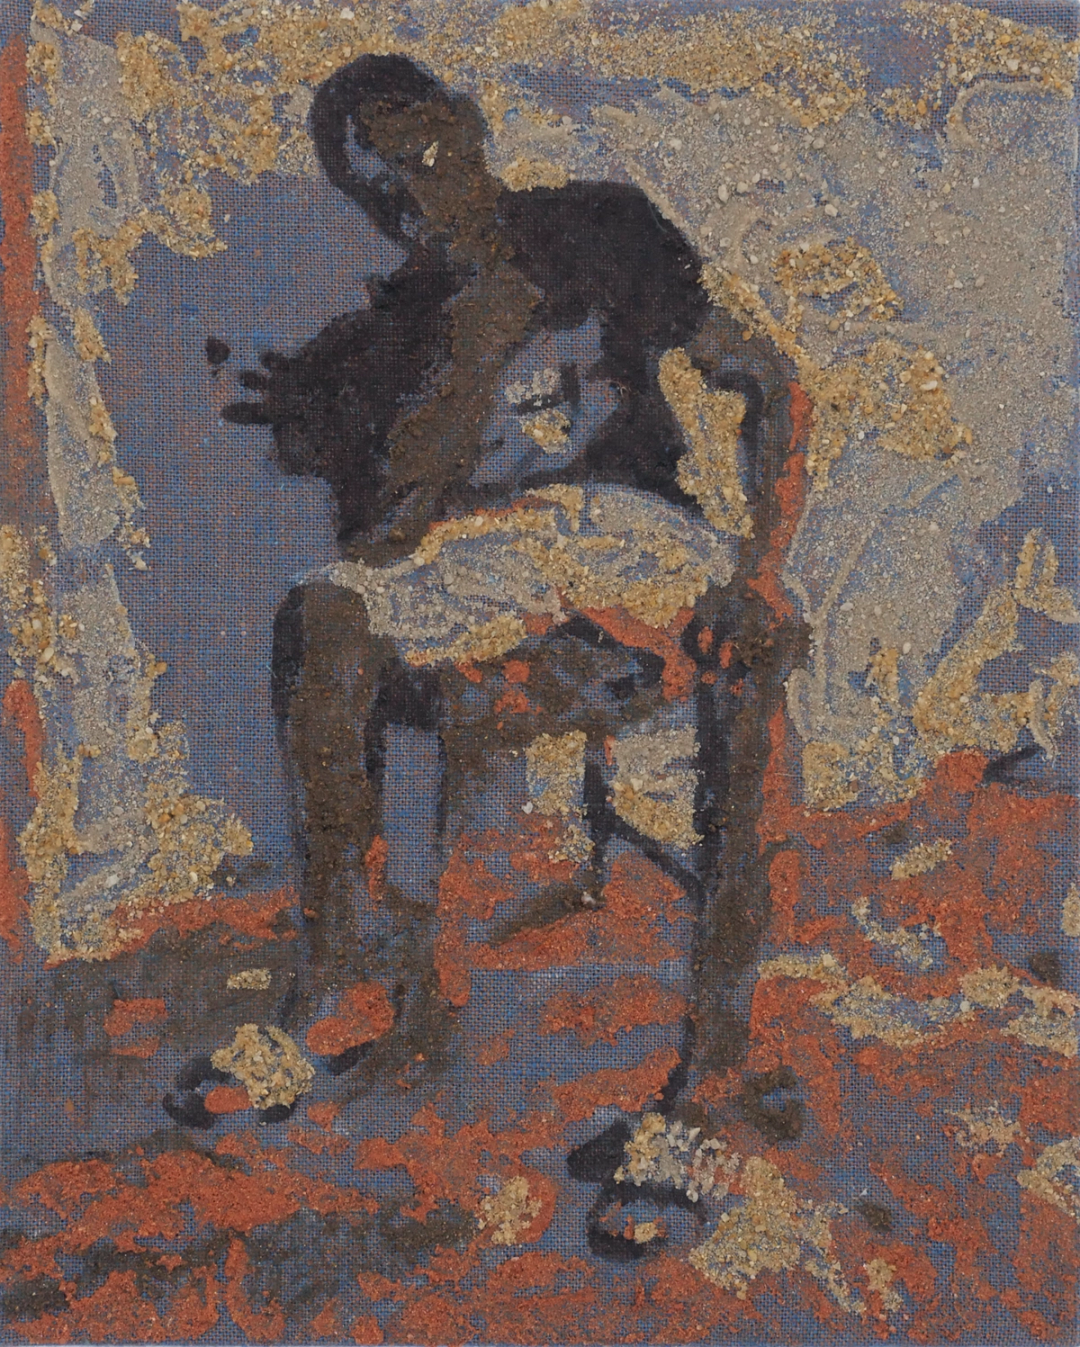 A man sitting on a chair in a painting.